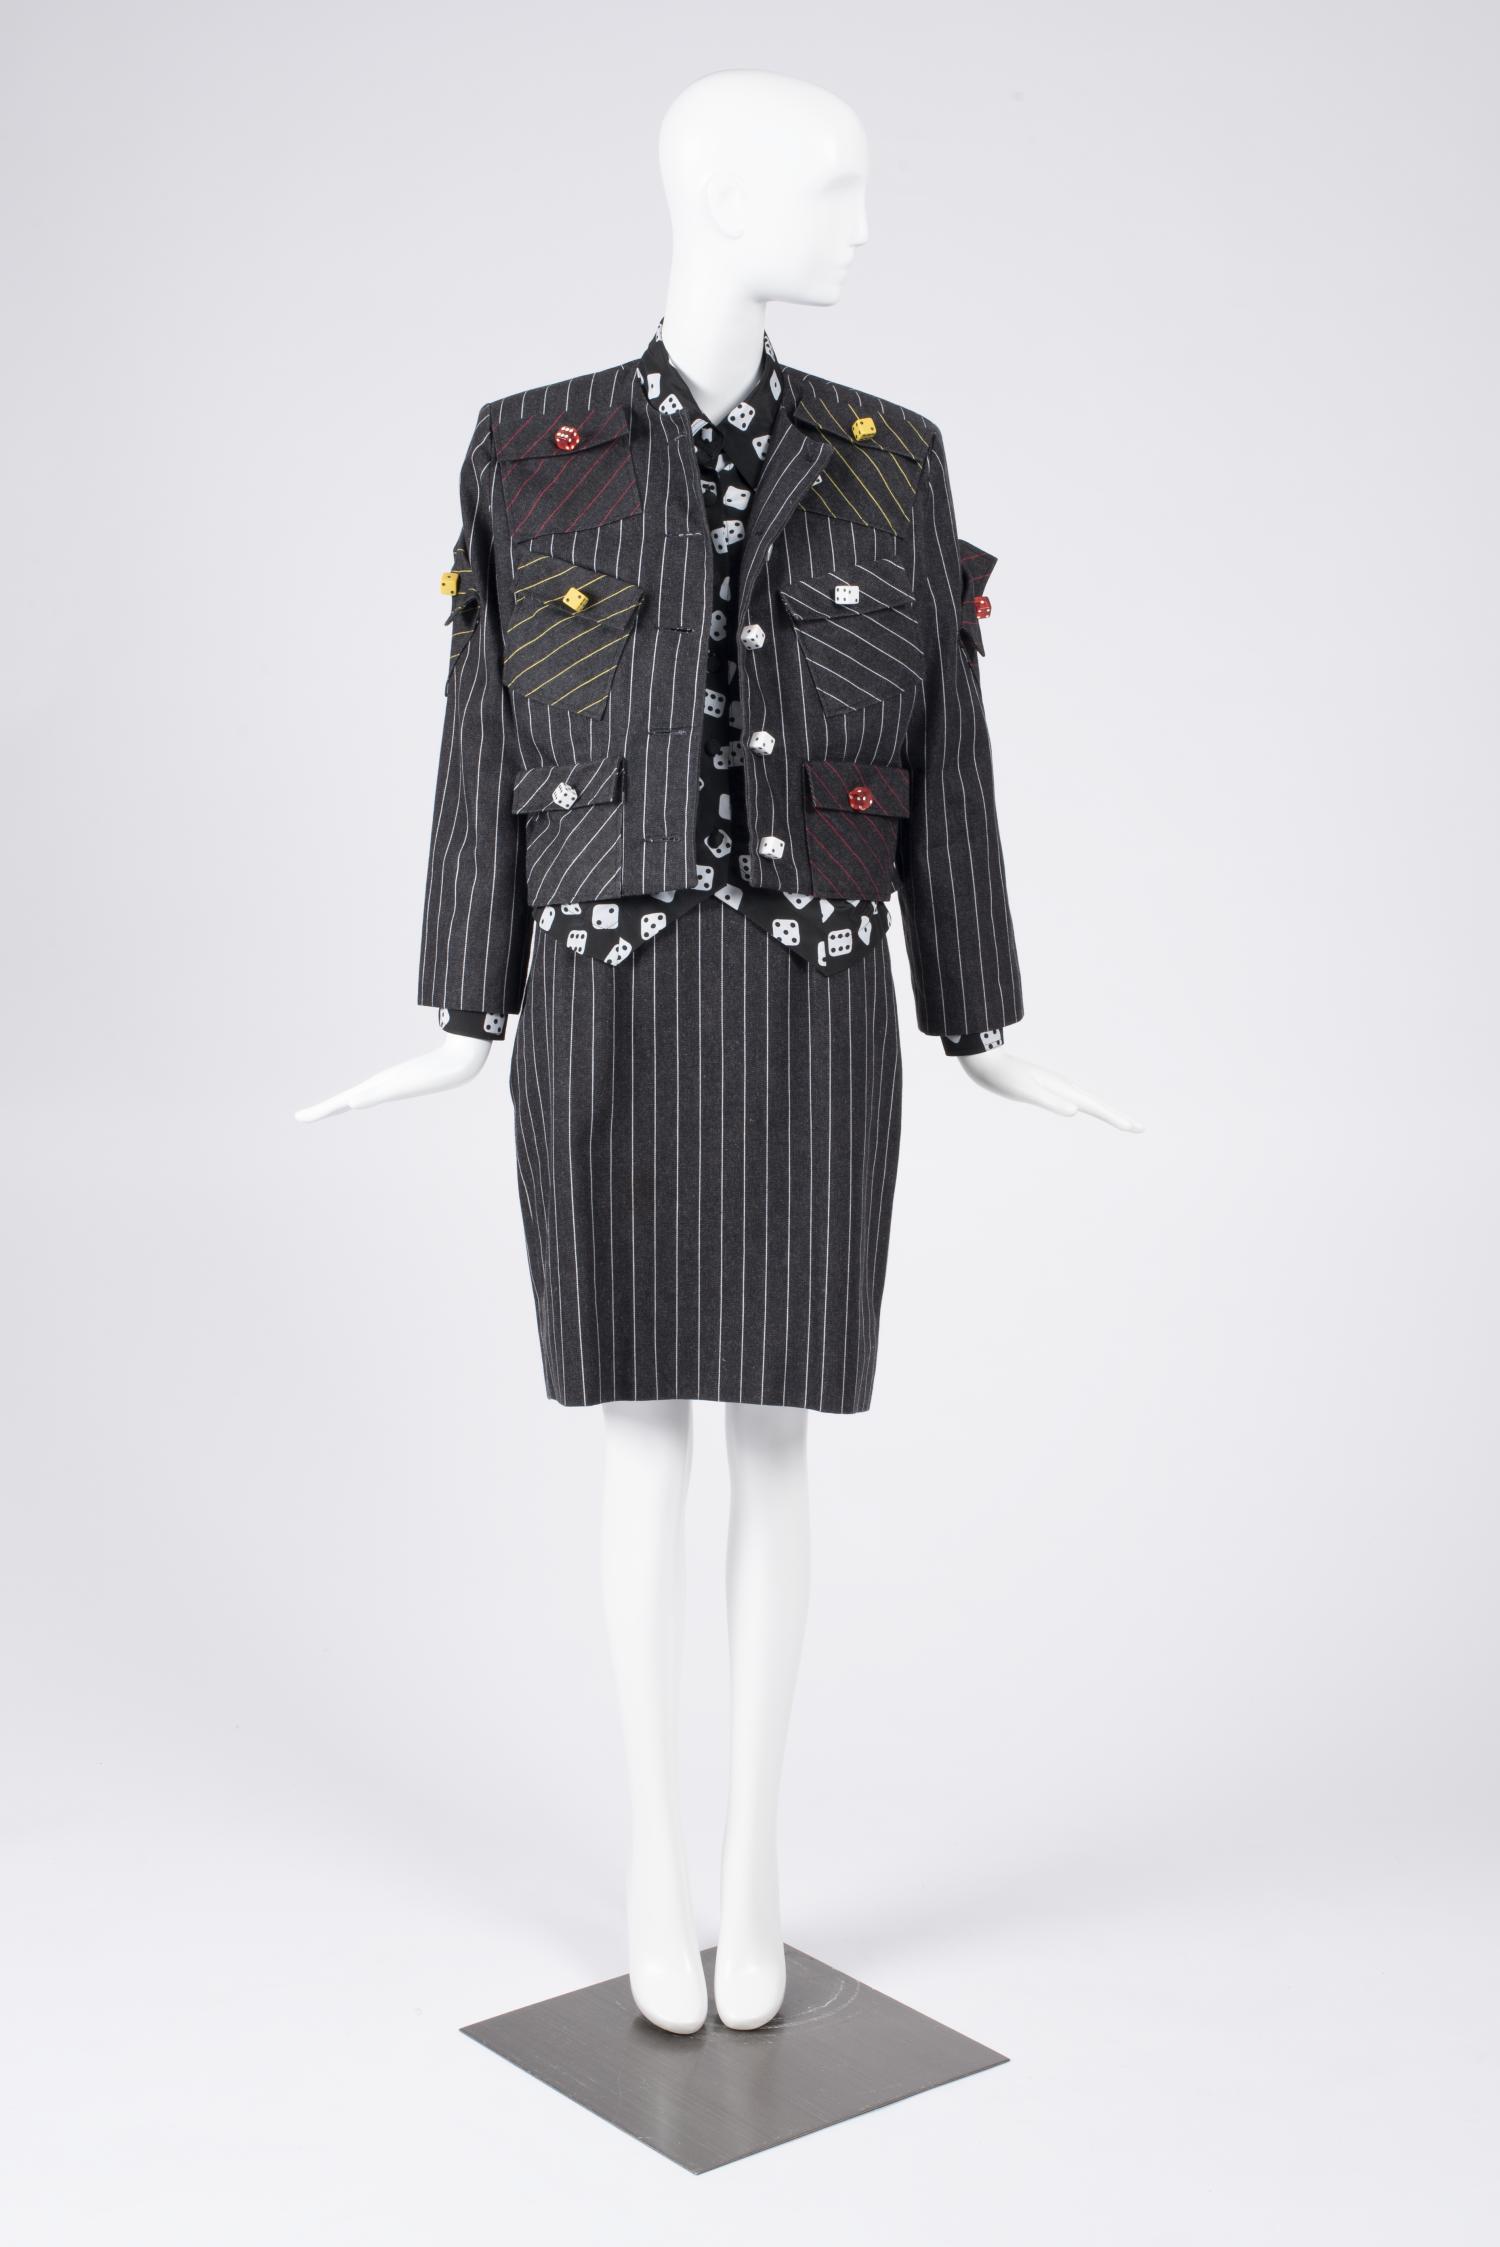 Photo of designer Patrick Kelly's pinstripe skirt suit with novelty dice print and buttons.